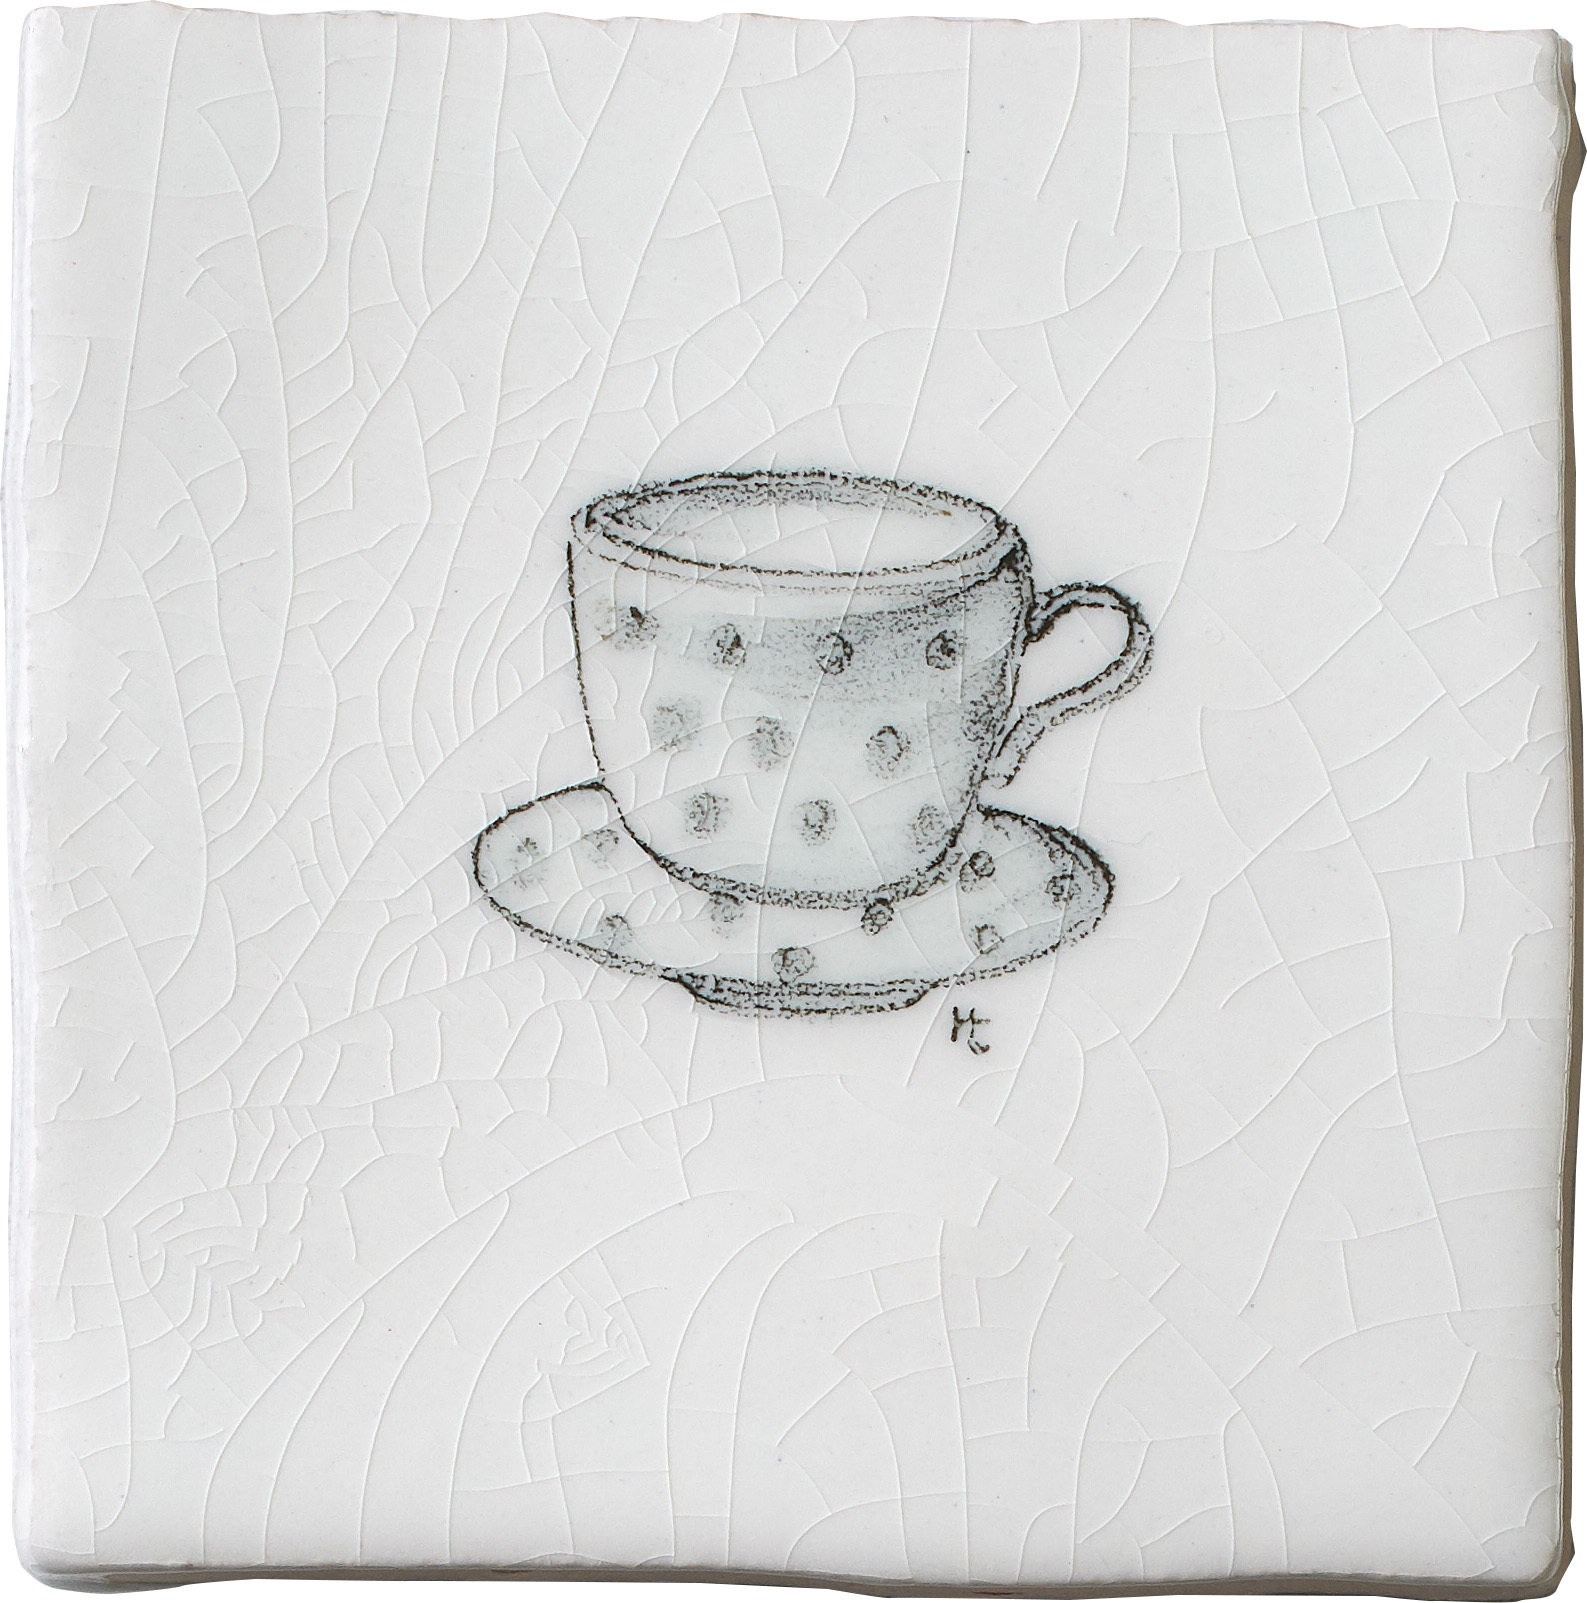 Teacup Taco 4, product variant image